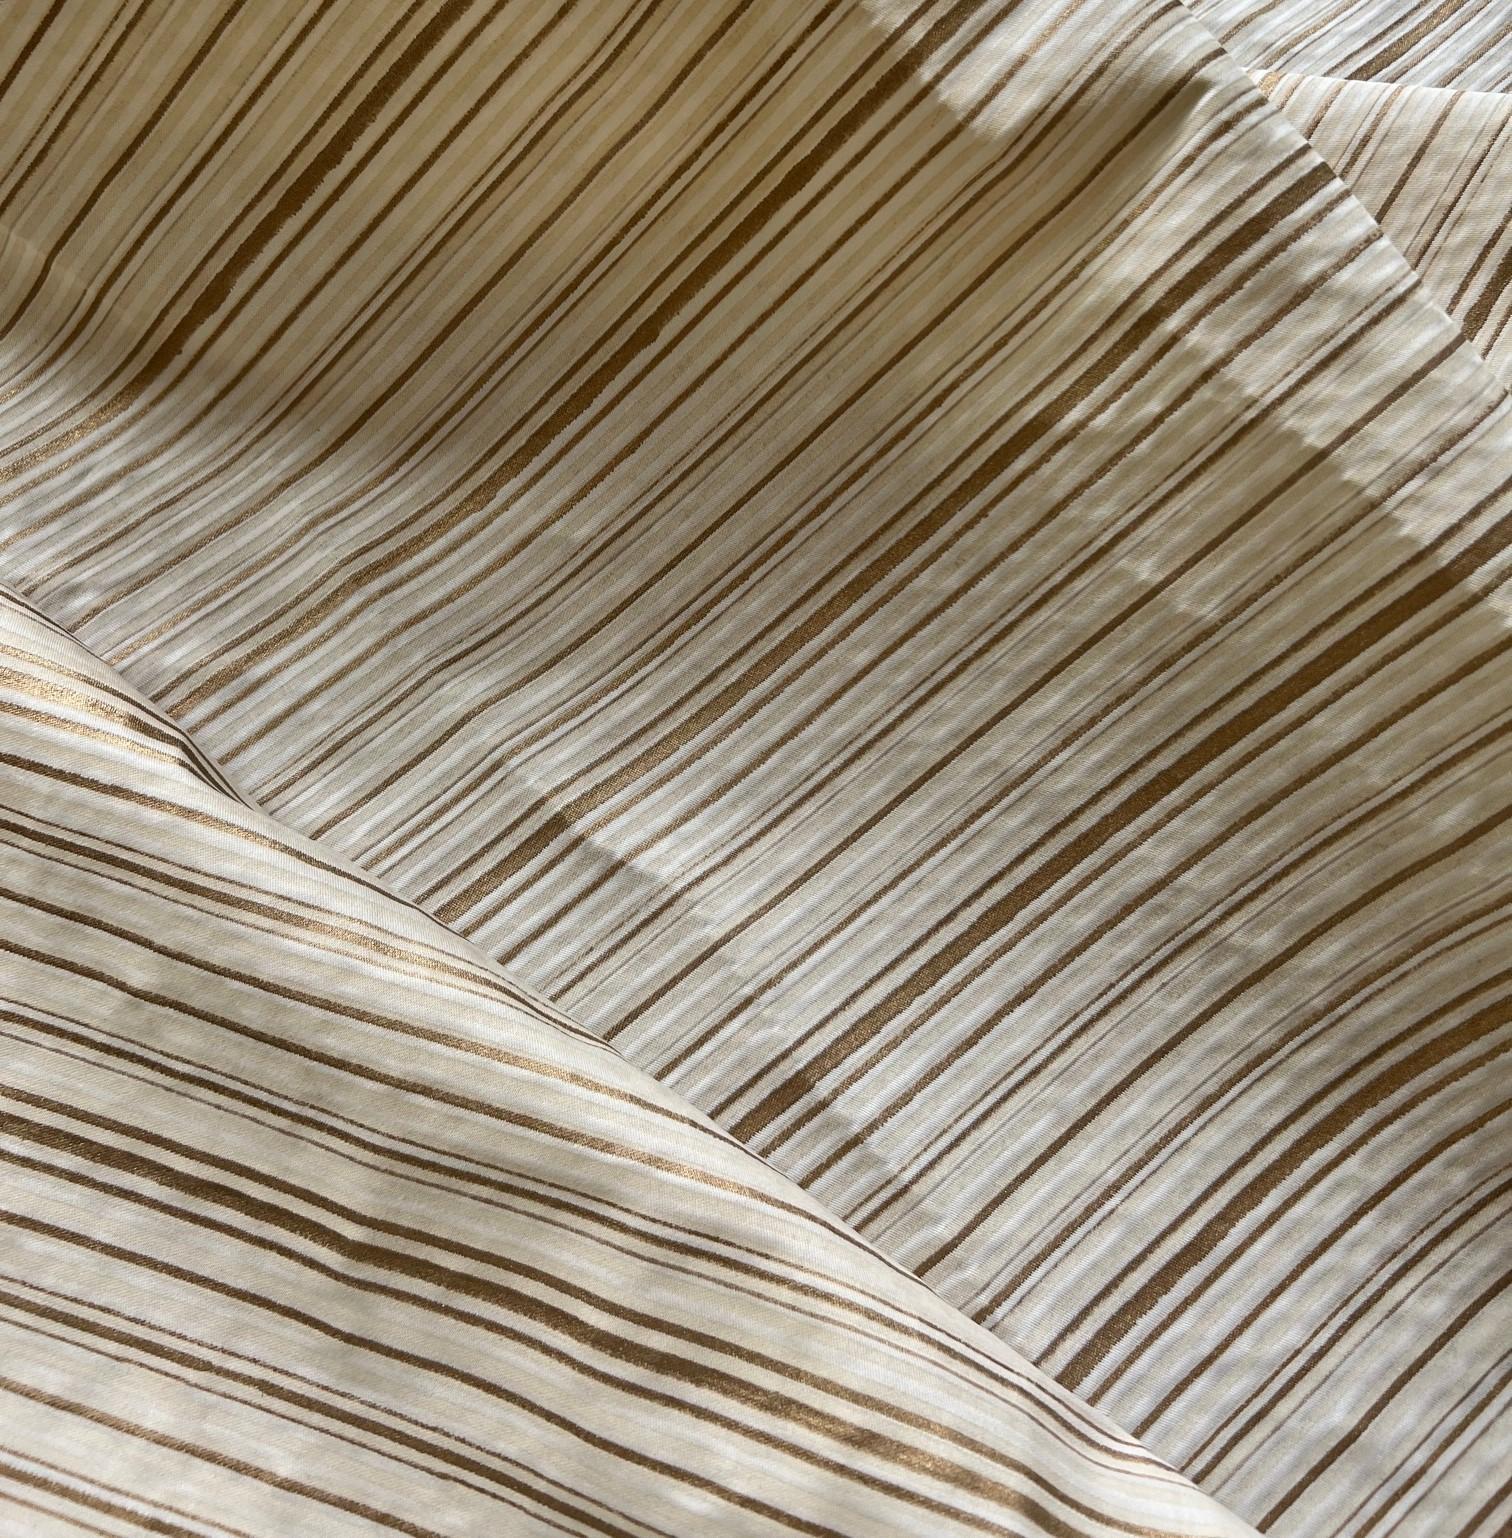 Hand-Crafted Venetian Fortuny Malmaison Fabric in String and Gold Stripes on Ivory, 28 Yards For Sale